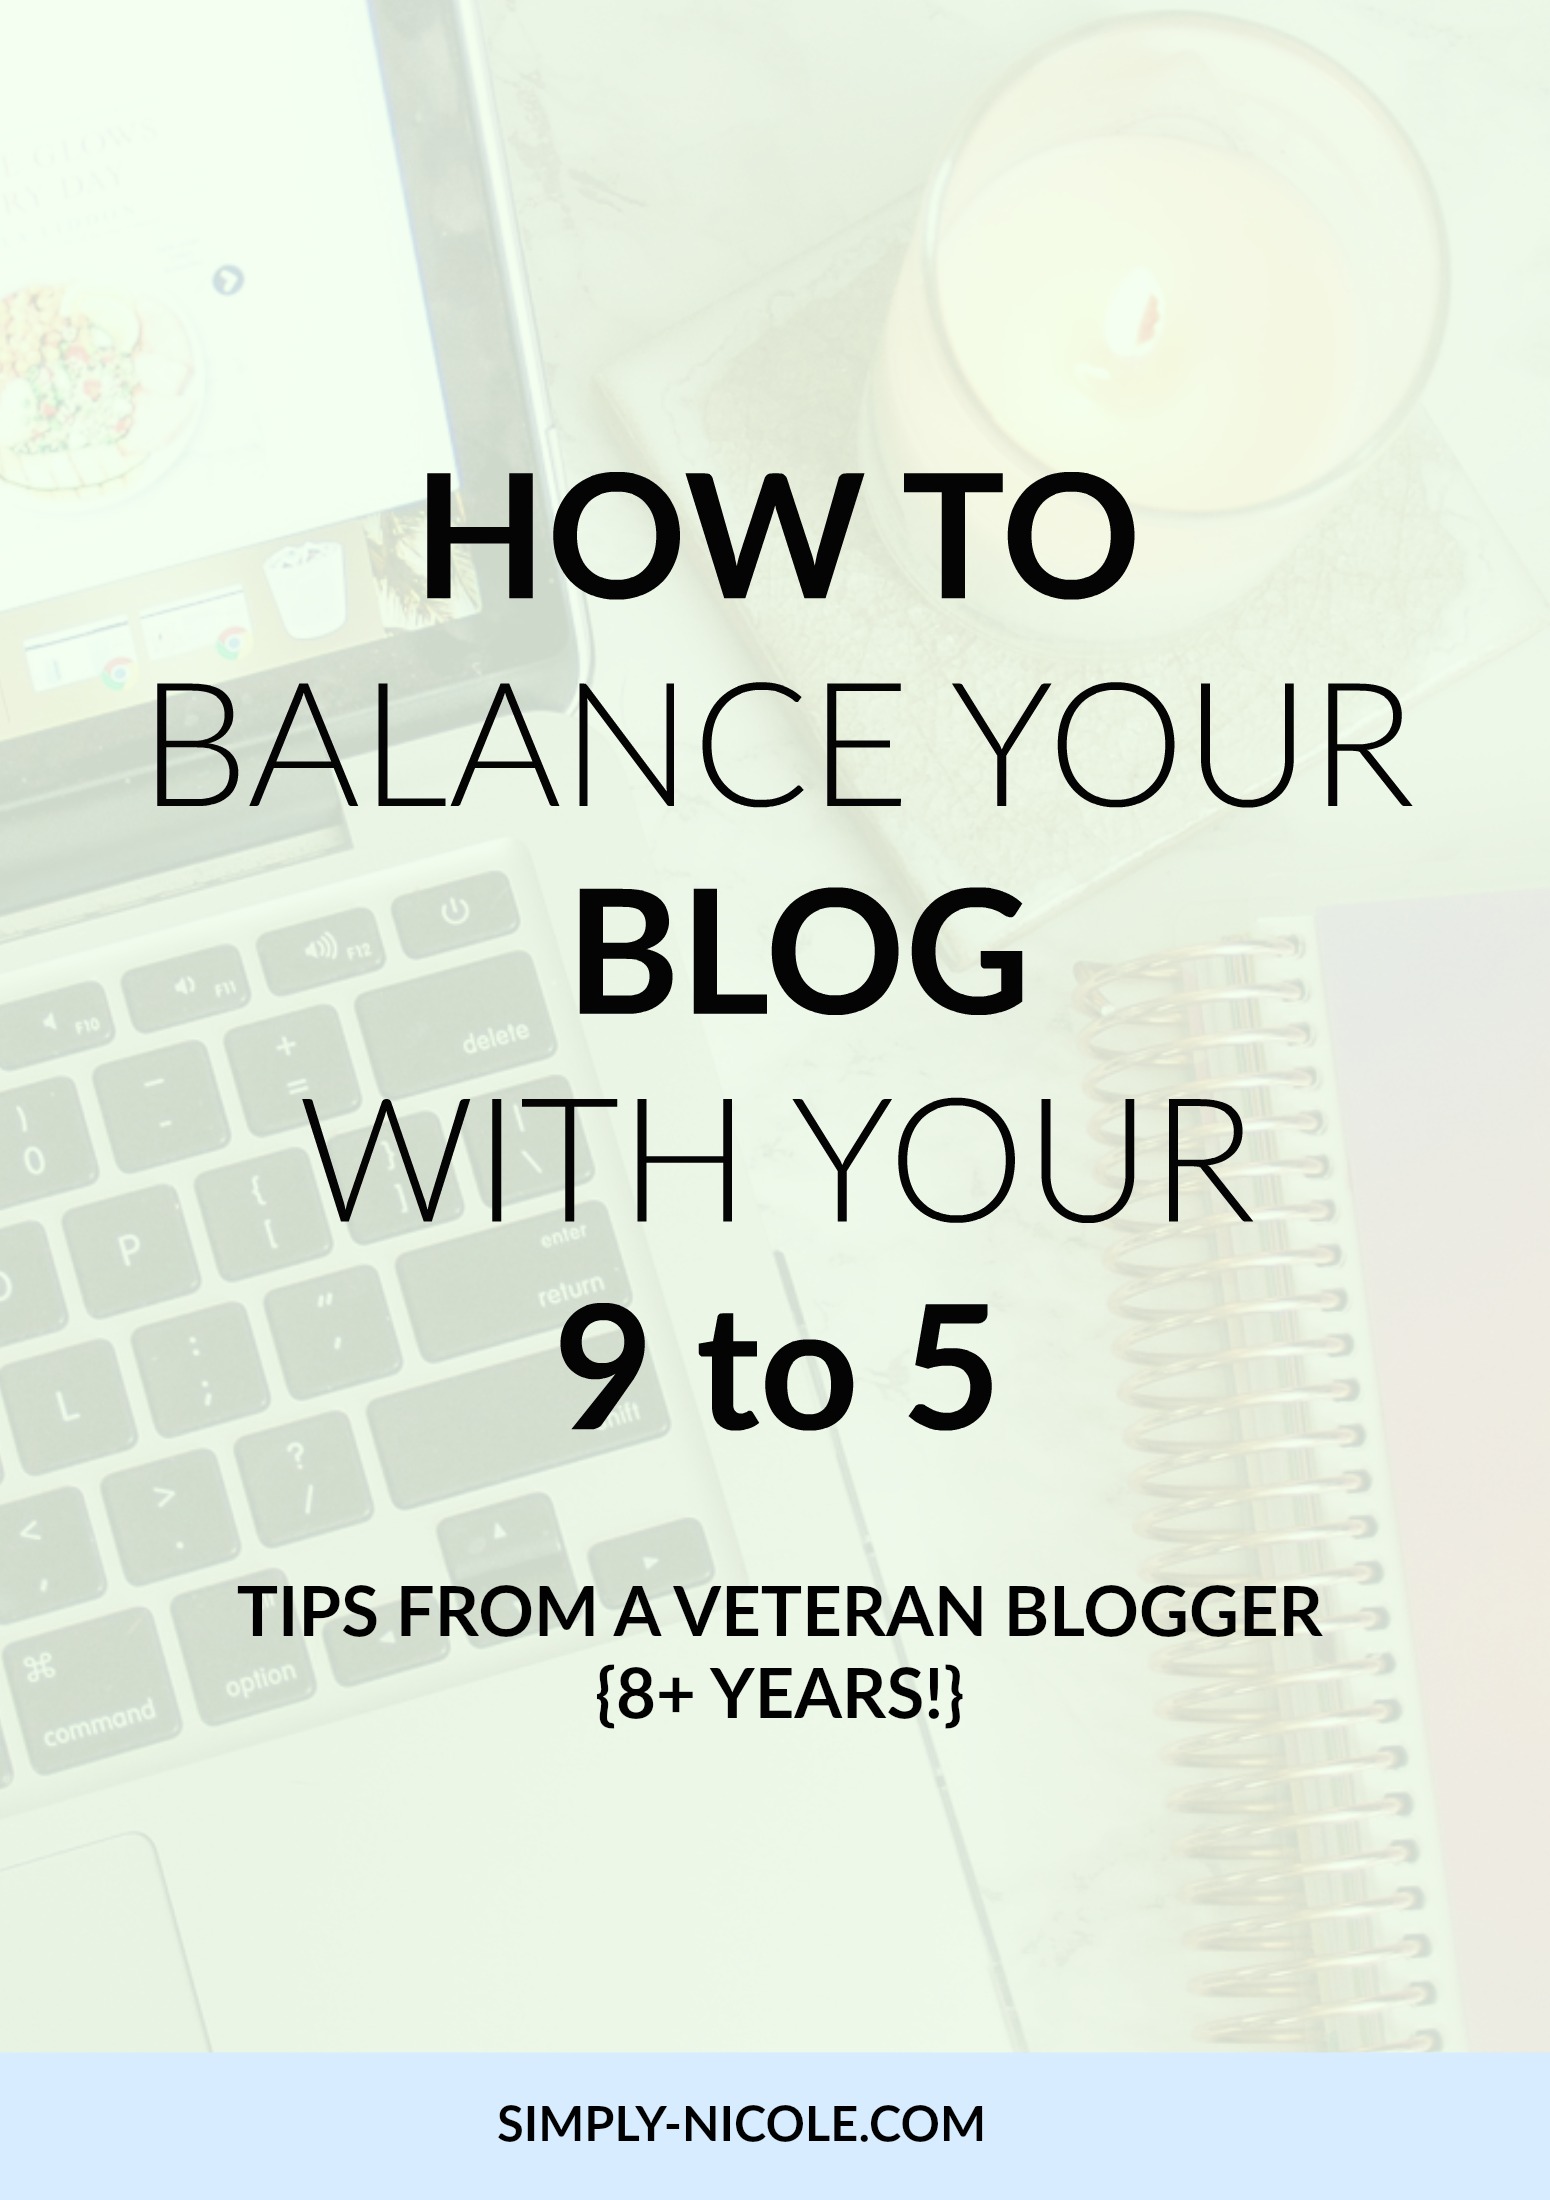 Tips for balancing your blog with your full time job